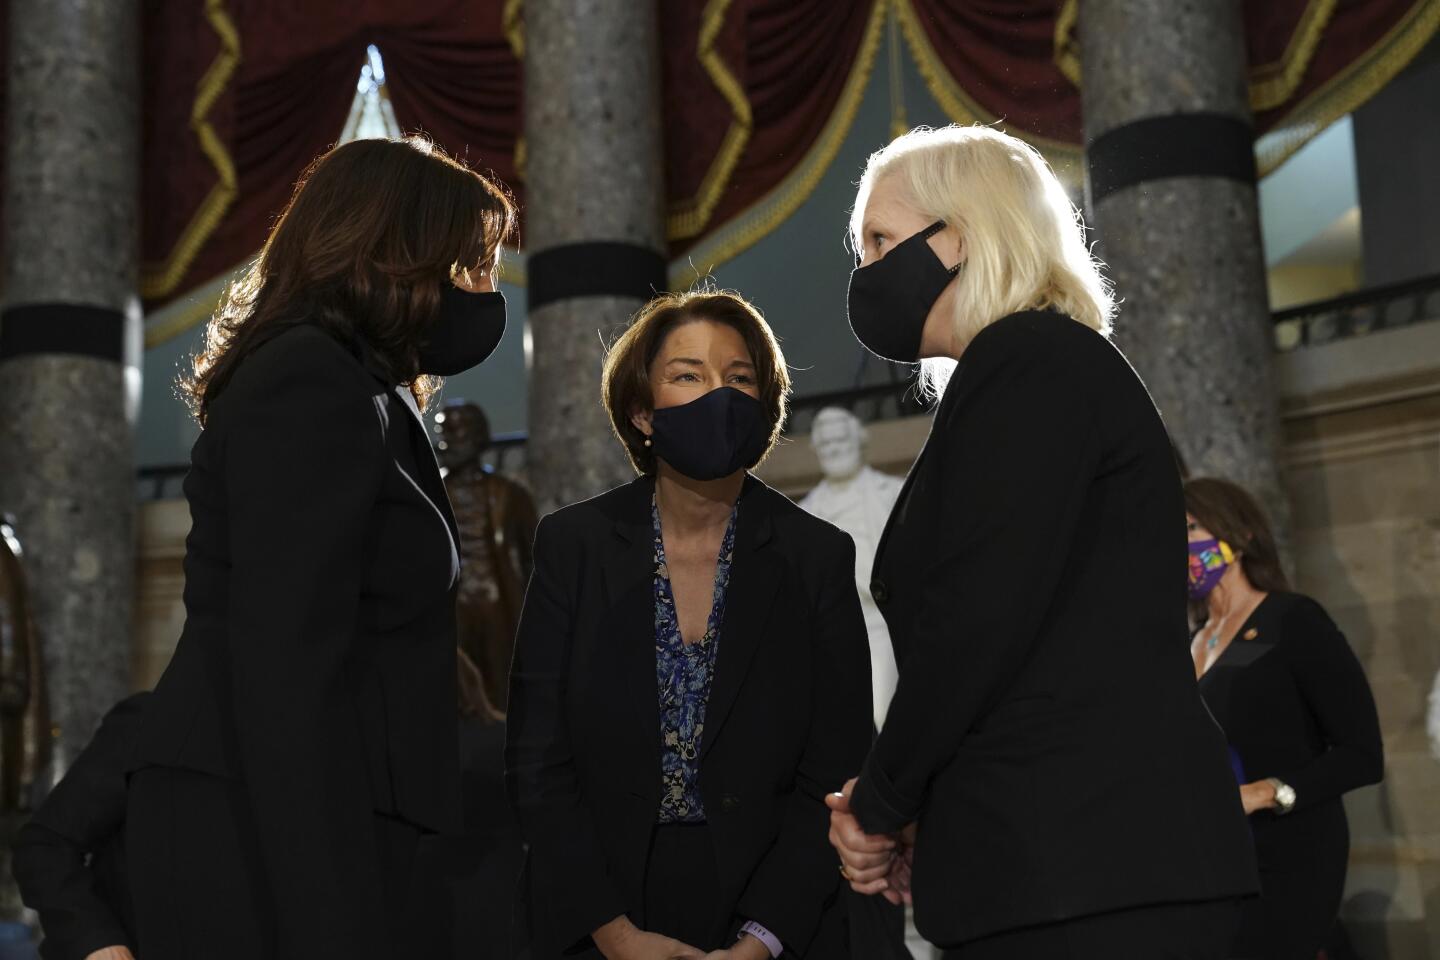 Sens. Kamala Harris, left, Amy Klobuchar and Kirsten Gillibrand talk before ceremony for late Justice Ruth Bader Ginsburg